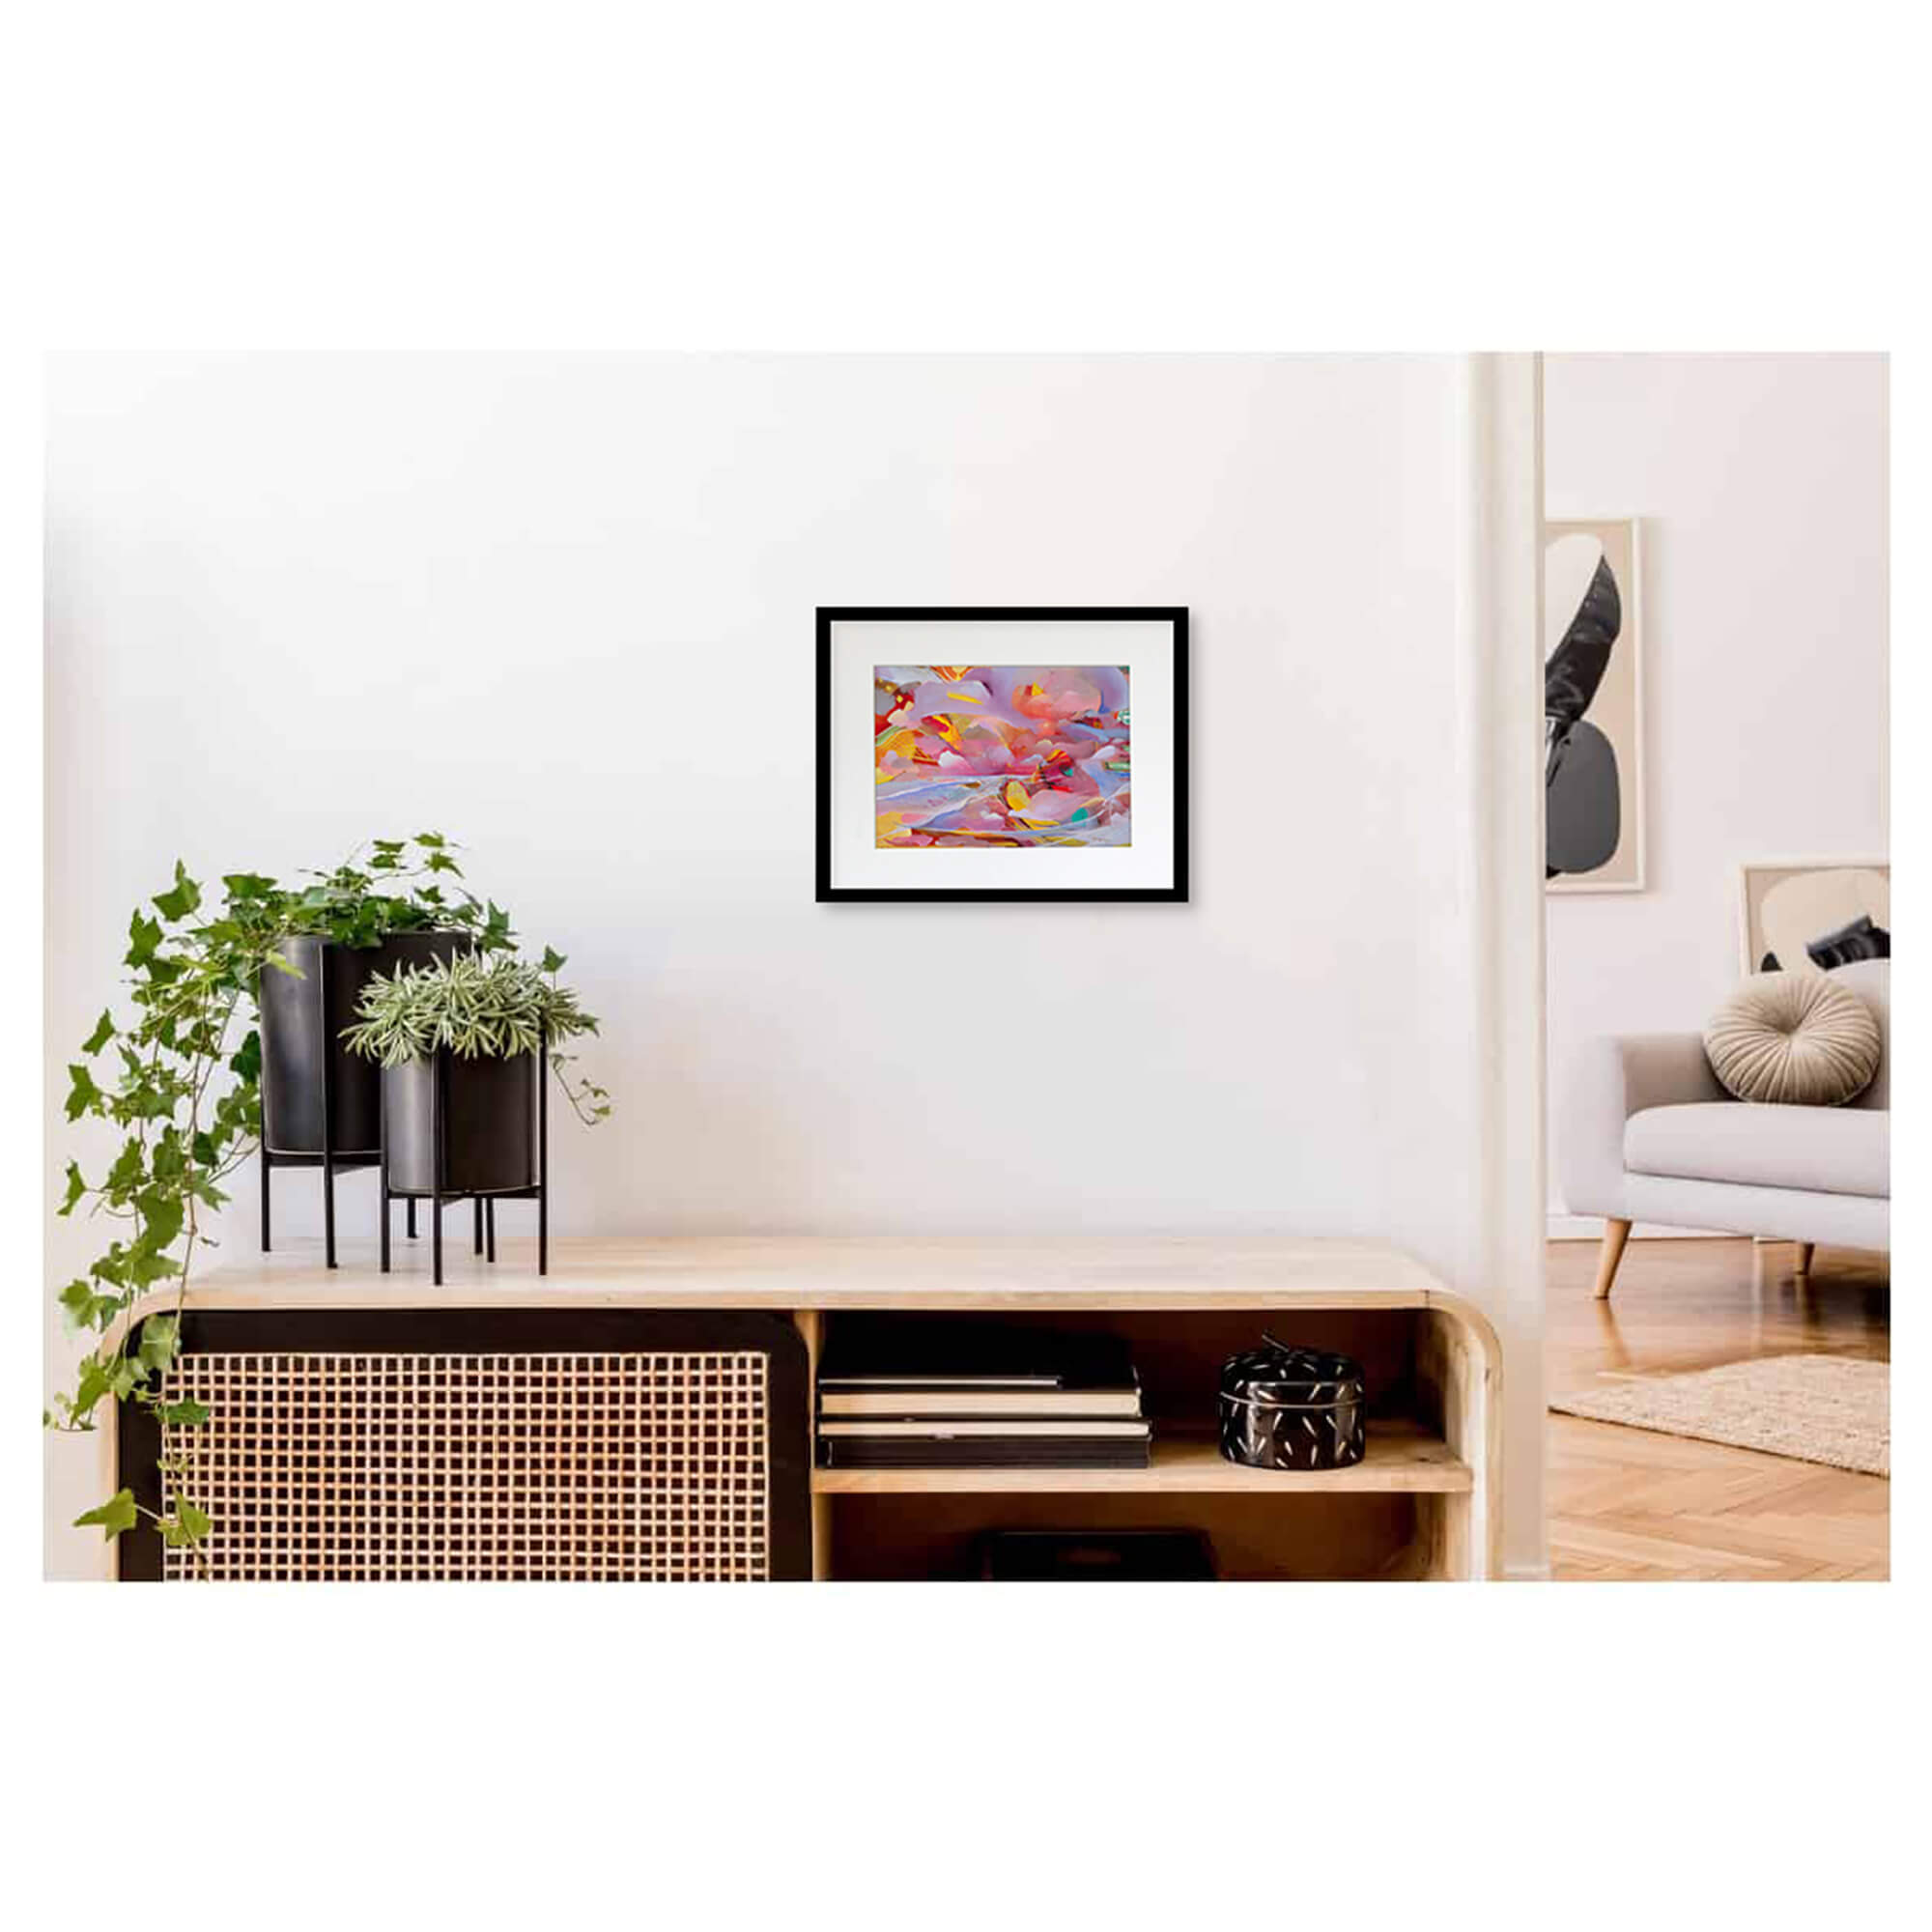 Framed matted art print of a vibrant artwork that features the beach horizon with cotton candy colors by Hawaii artist Saumolia Puapuaga